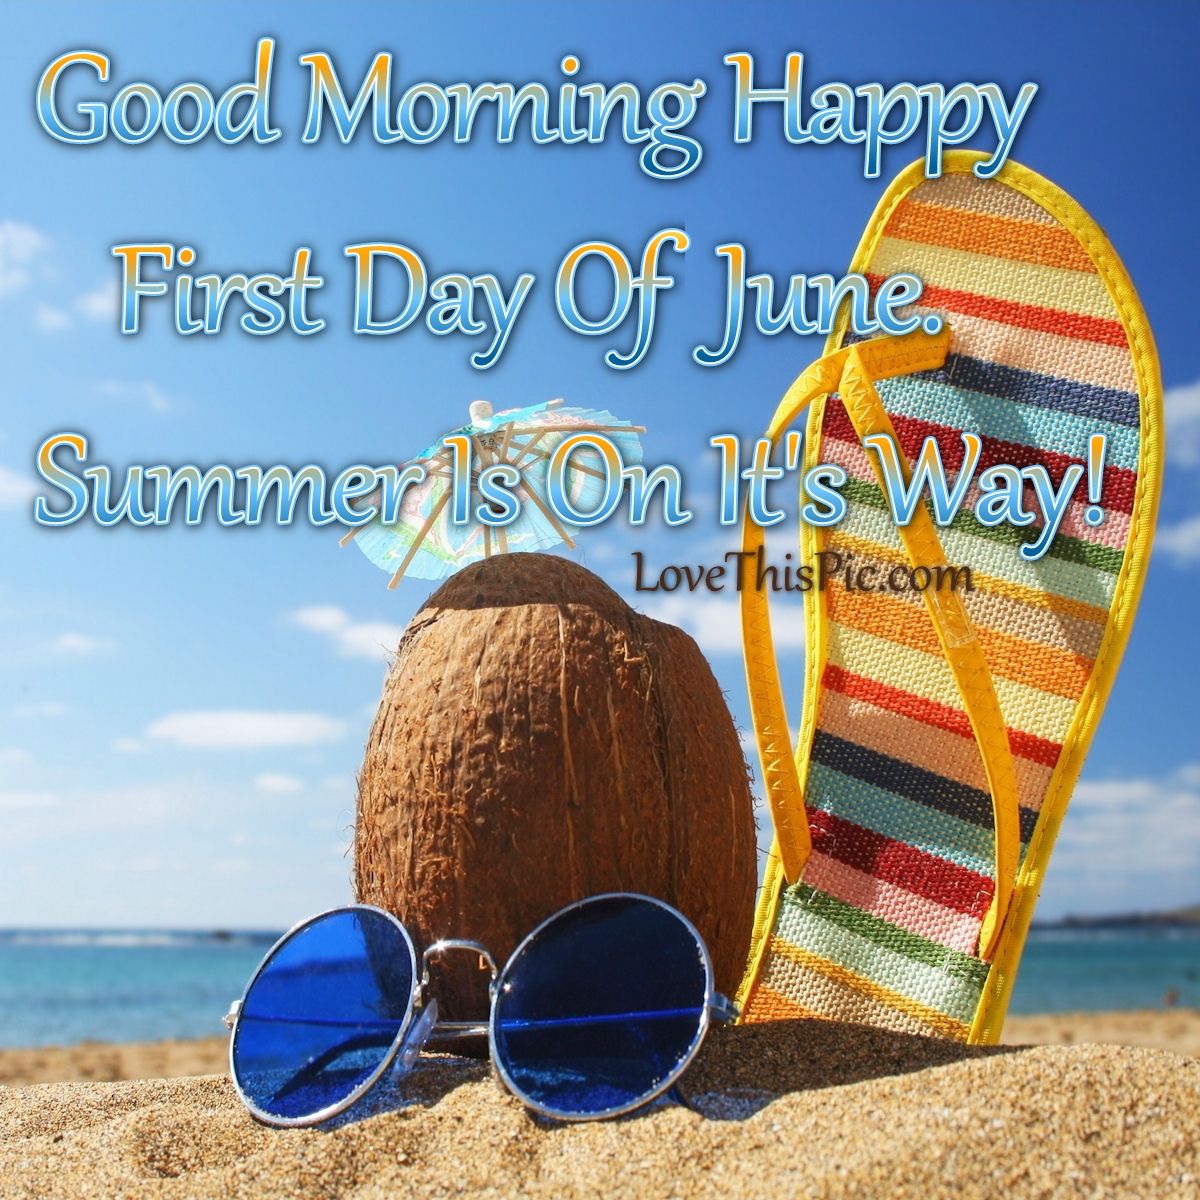 Good Morning Happy First Day Of June - Happy First Day Of June - HD Wallpaper 